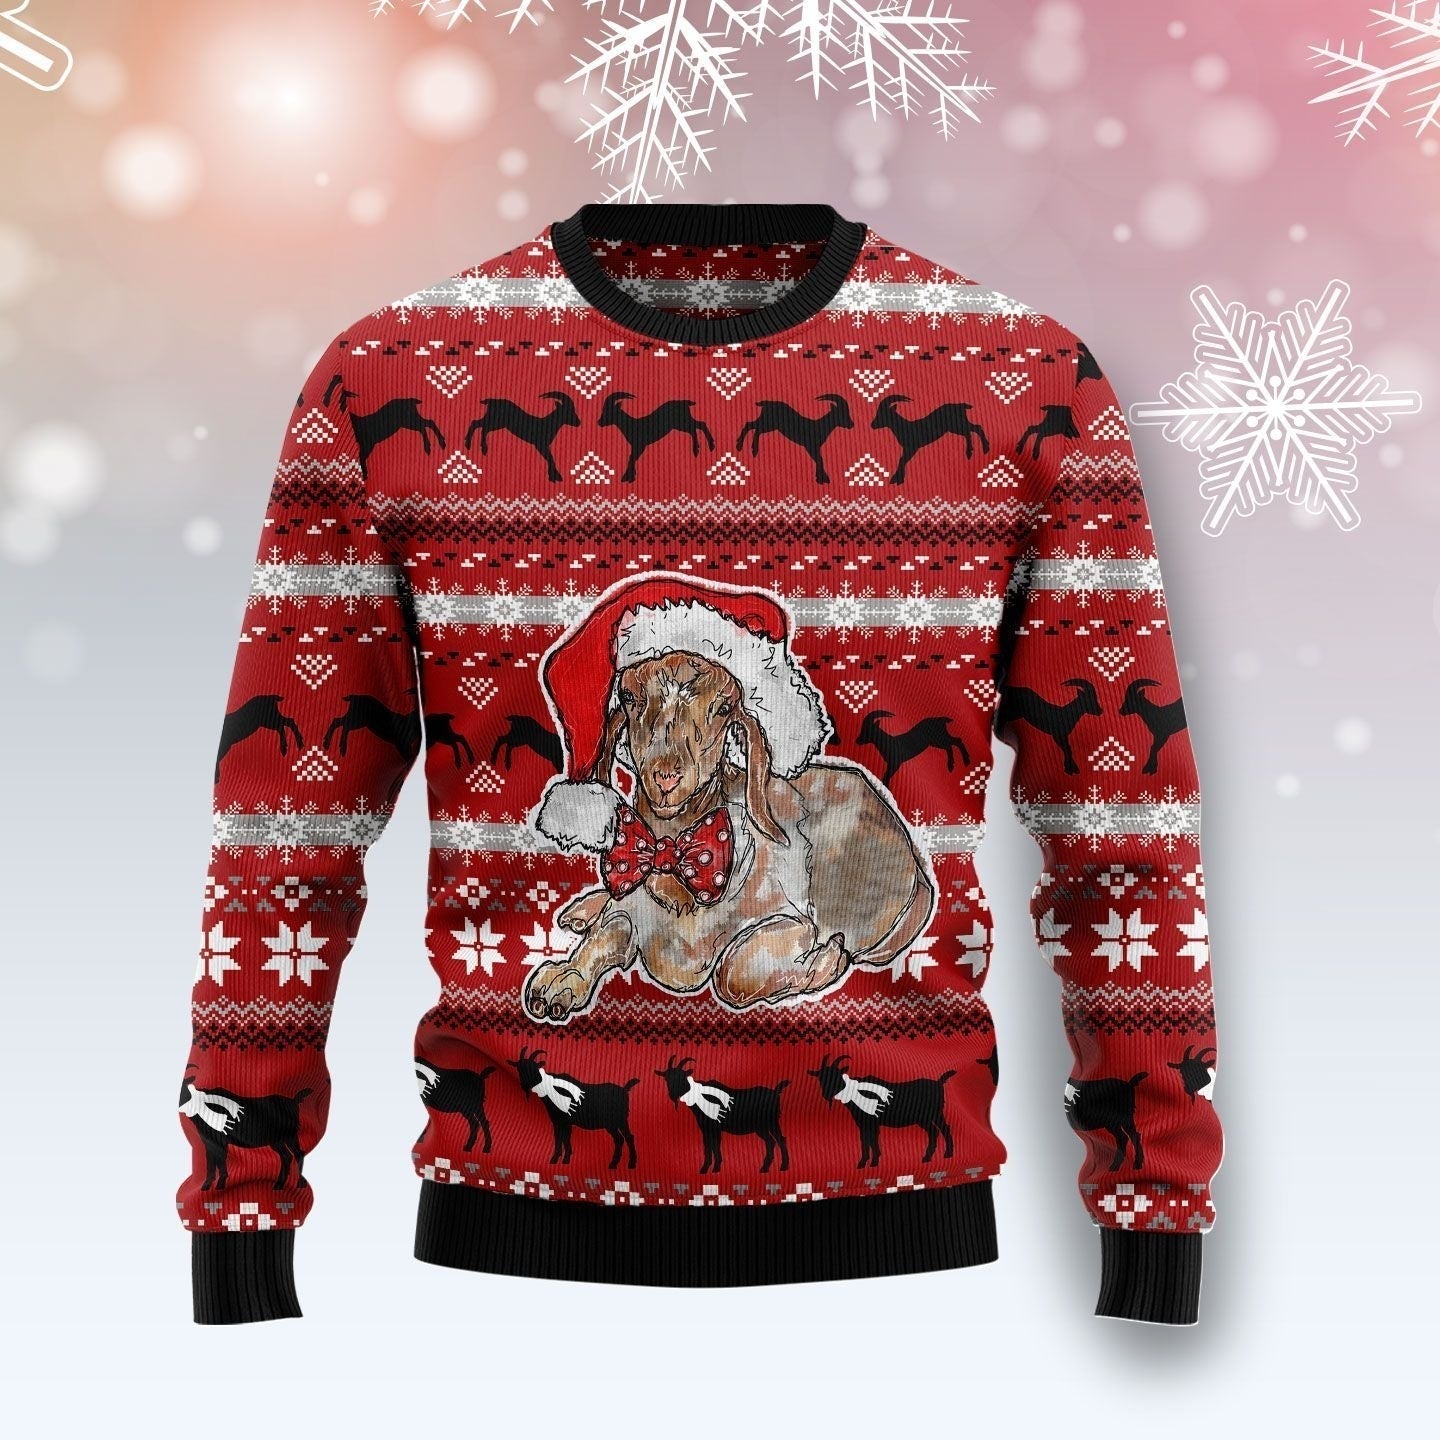 Lovely Santa Goat Ugly Christmas Sweater, Perfect Outfit For Christmas, Winter, New Year Of Goat Lovers